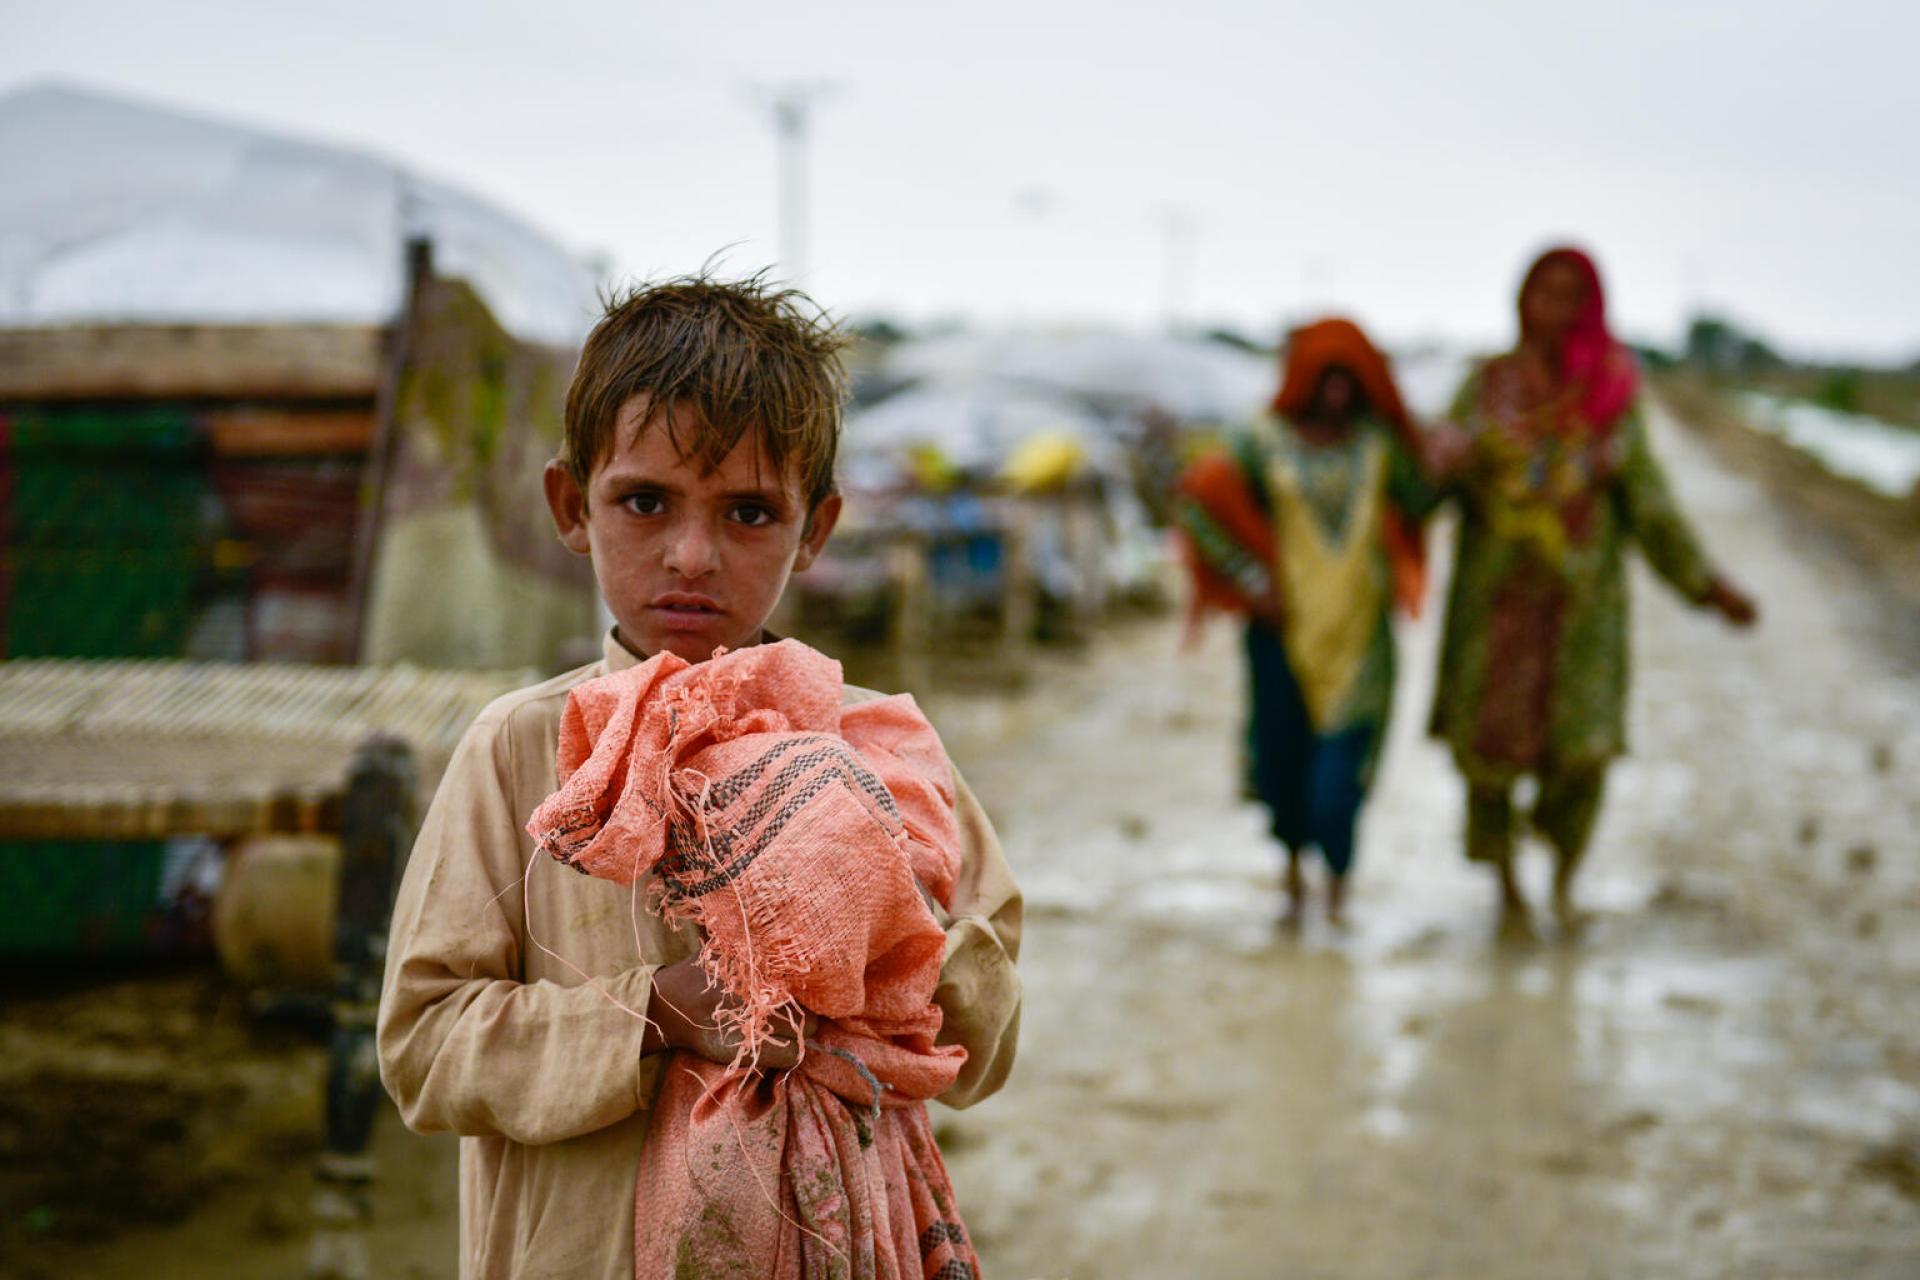 Pakistan will co-chair a UN conference for the flood victims' help.